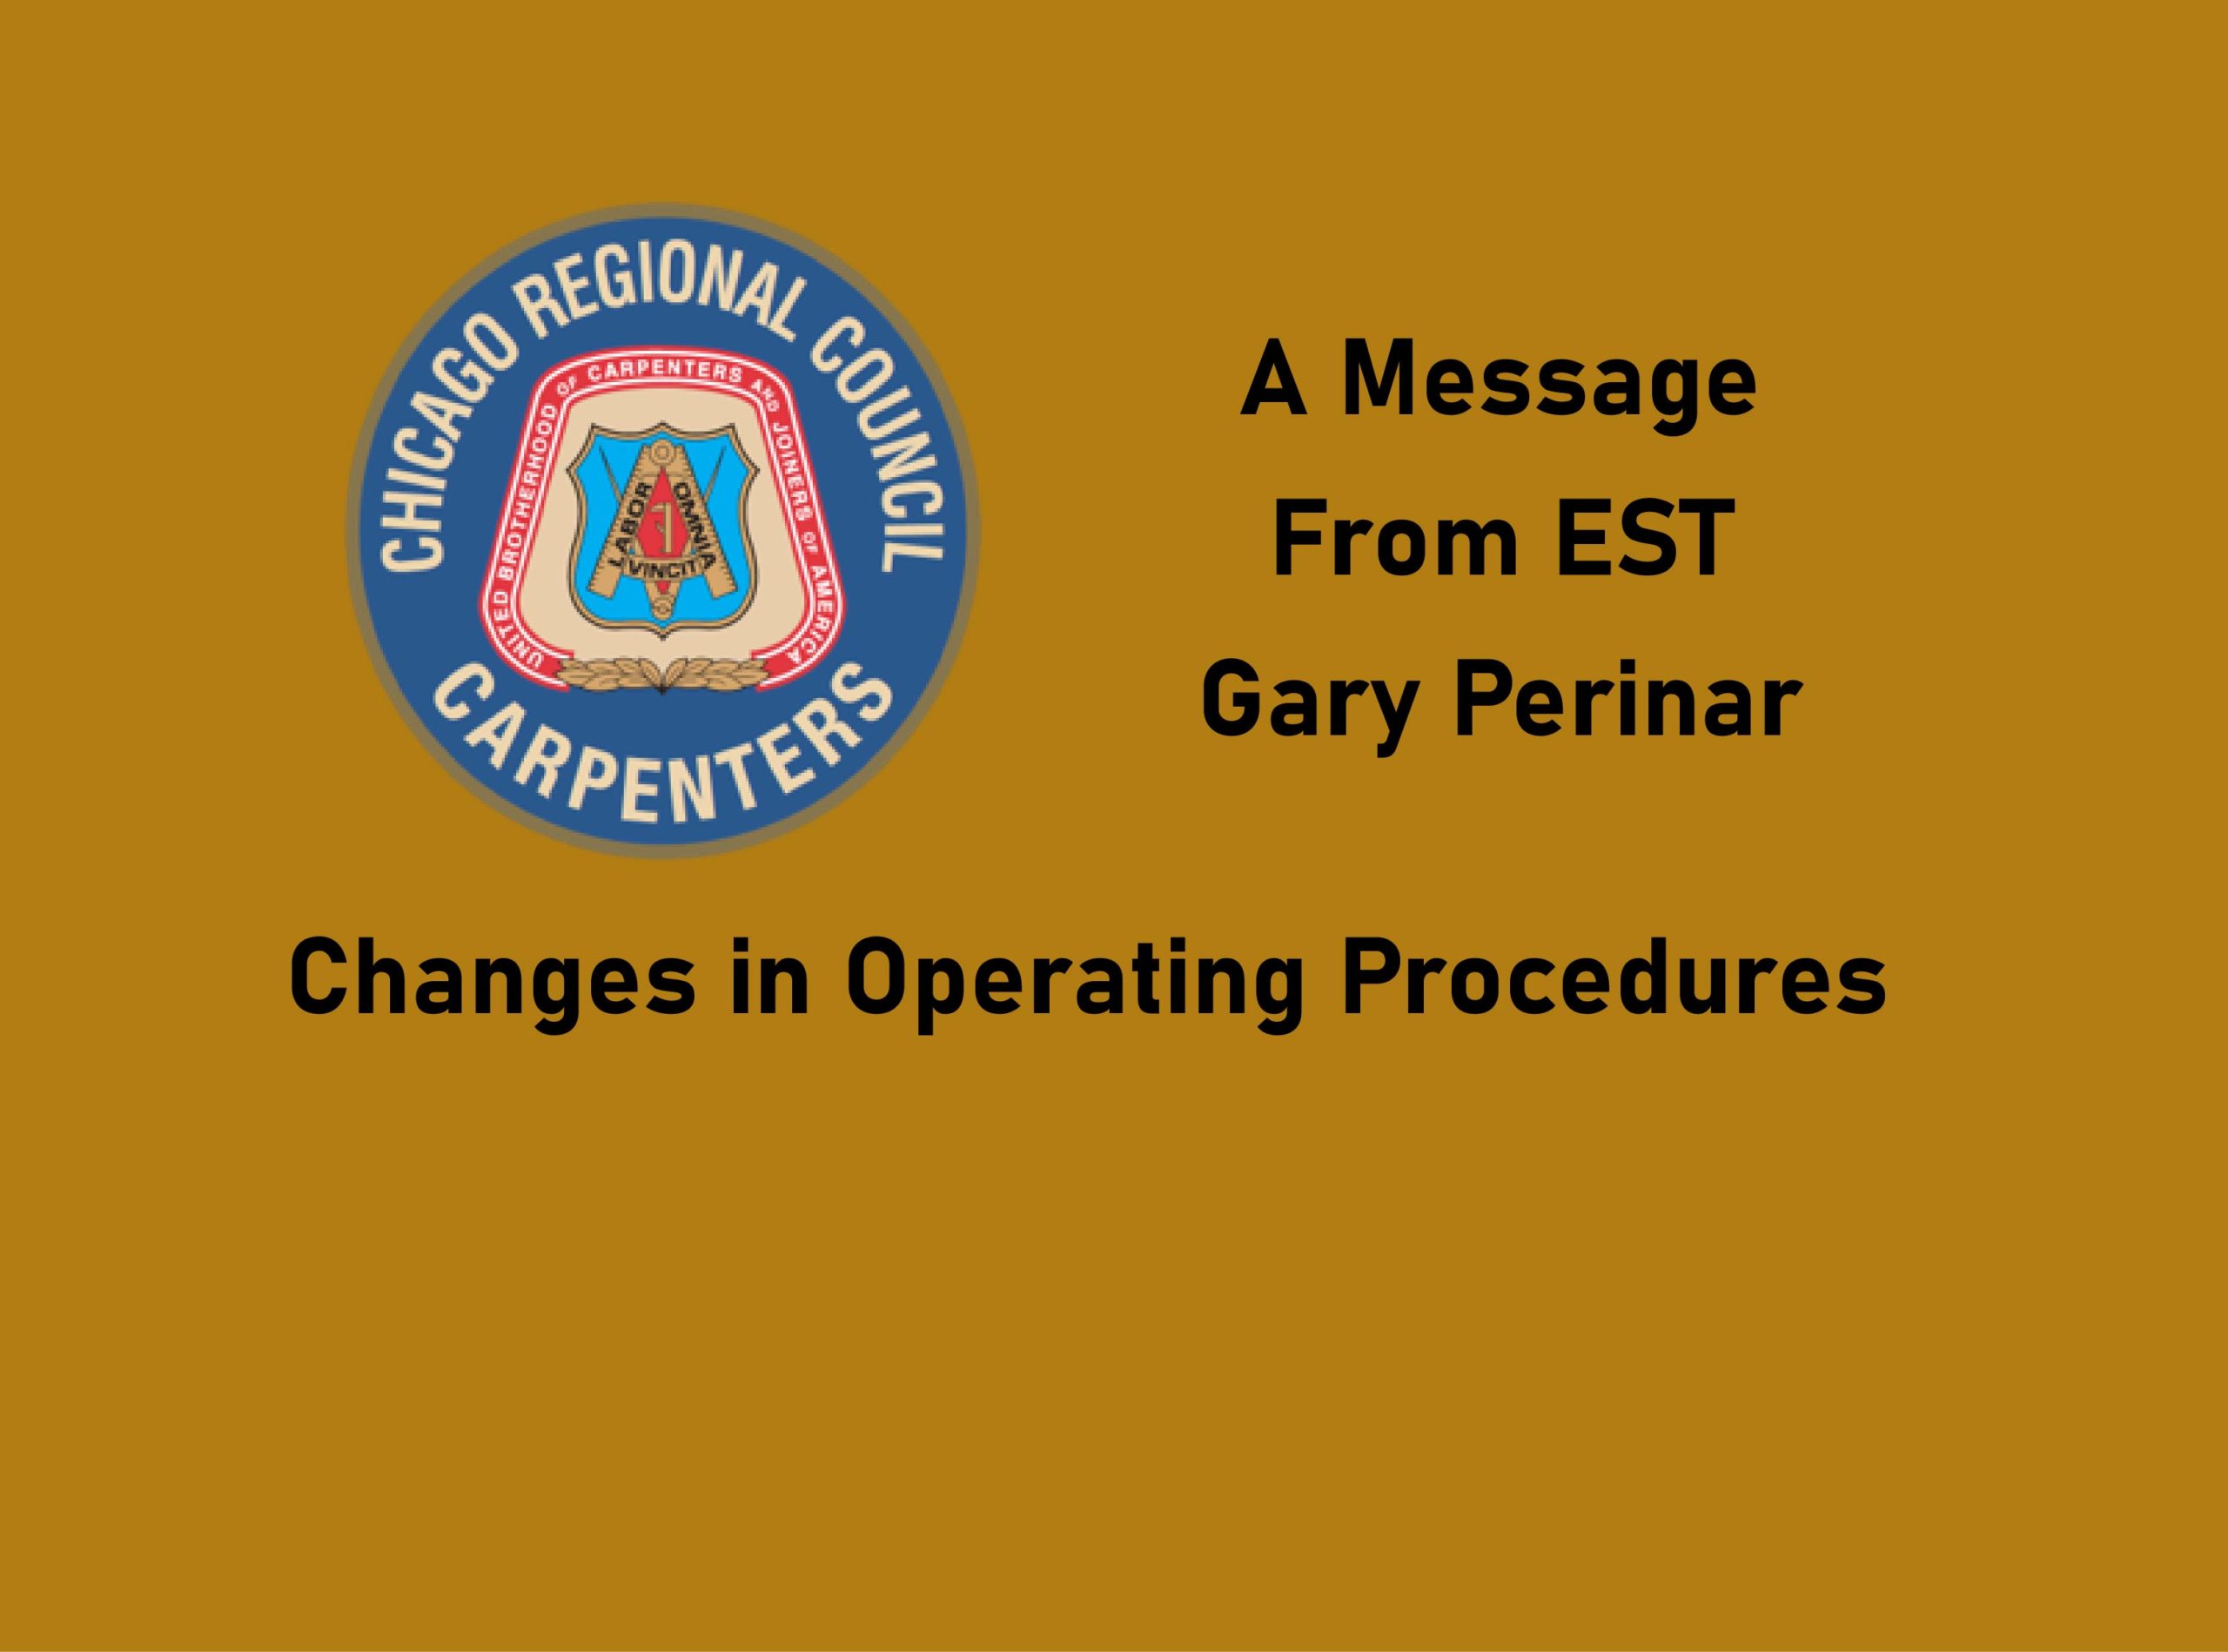 changes in operating procedure message